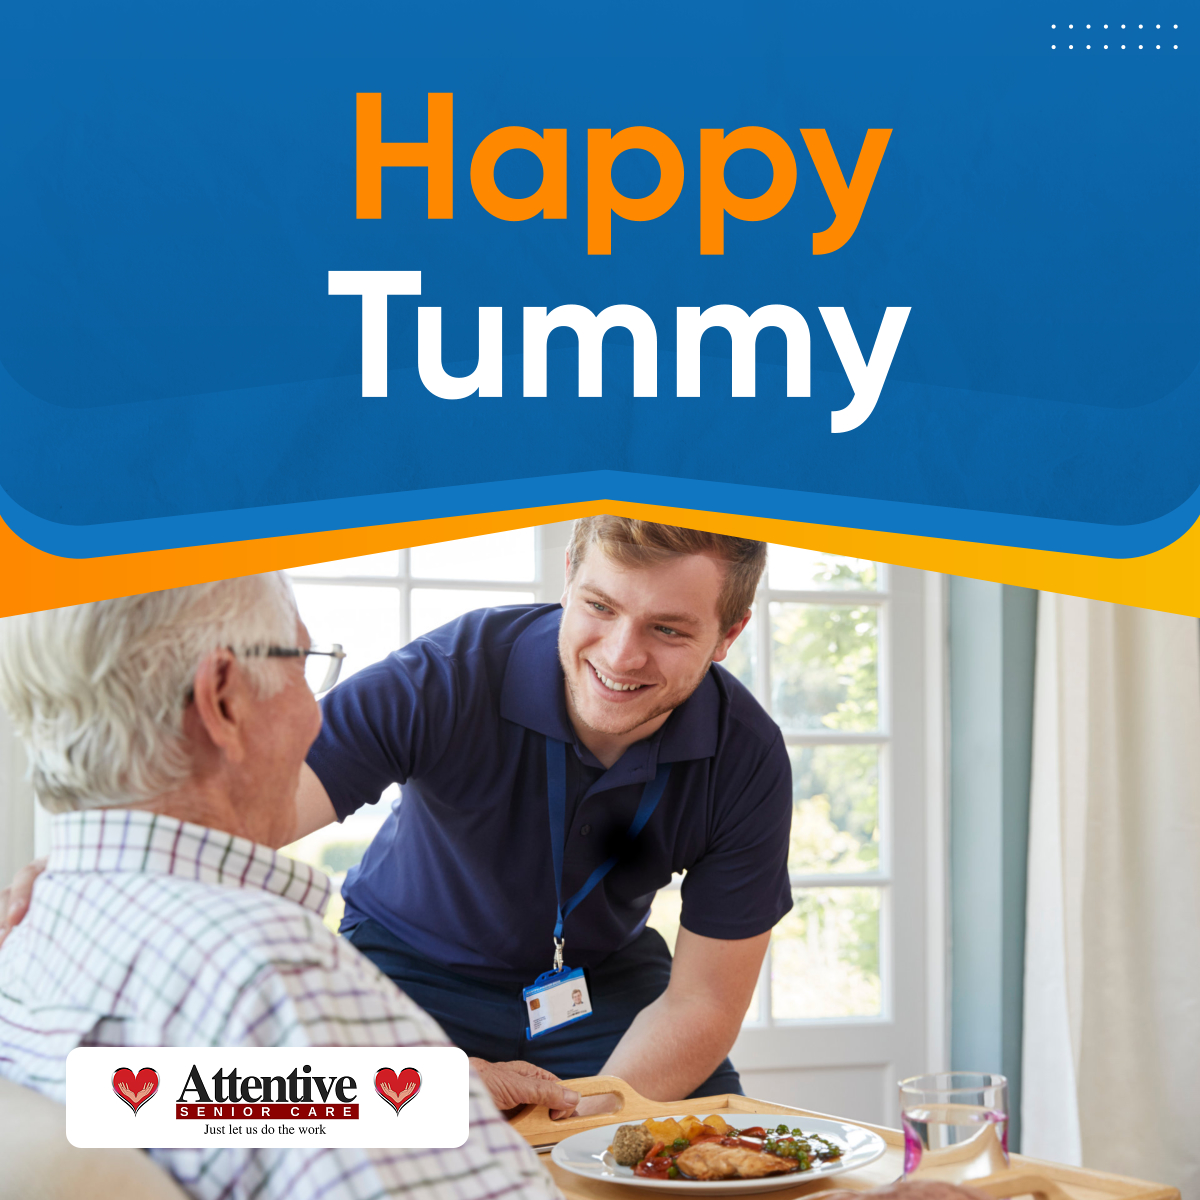 With Attentive Senior Care, you'll be assured of 3 nutritious meals daily, along with snacks and nourishments during the mid-day and in the evening. Come have a happy tummy with us. Contact us today to see more of our care services. #NutritiousMeals #HappyTummy #FresnoCA